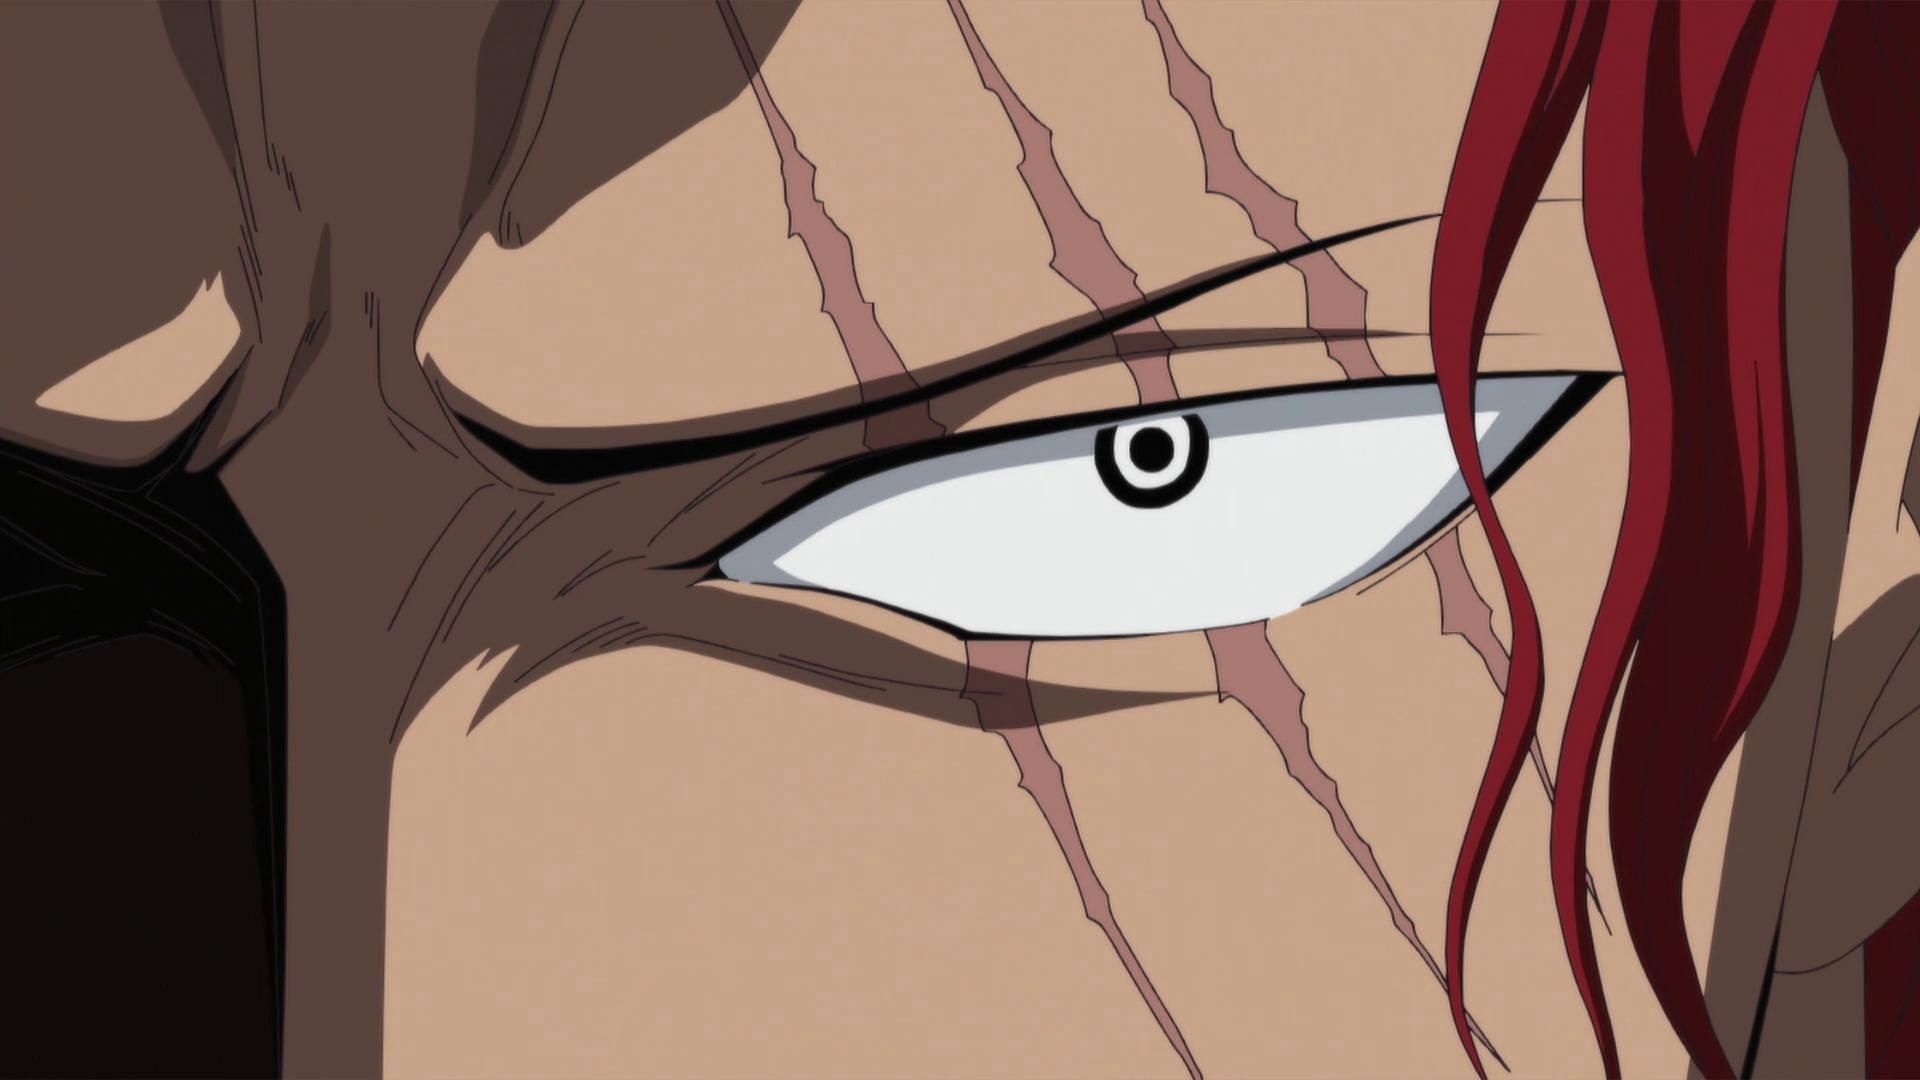 Shanks considers Teach the greatest danger for the One Piece world (Image via Toei Animation)